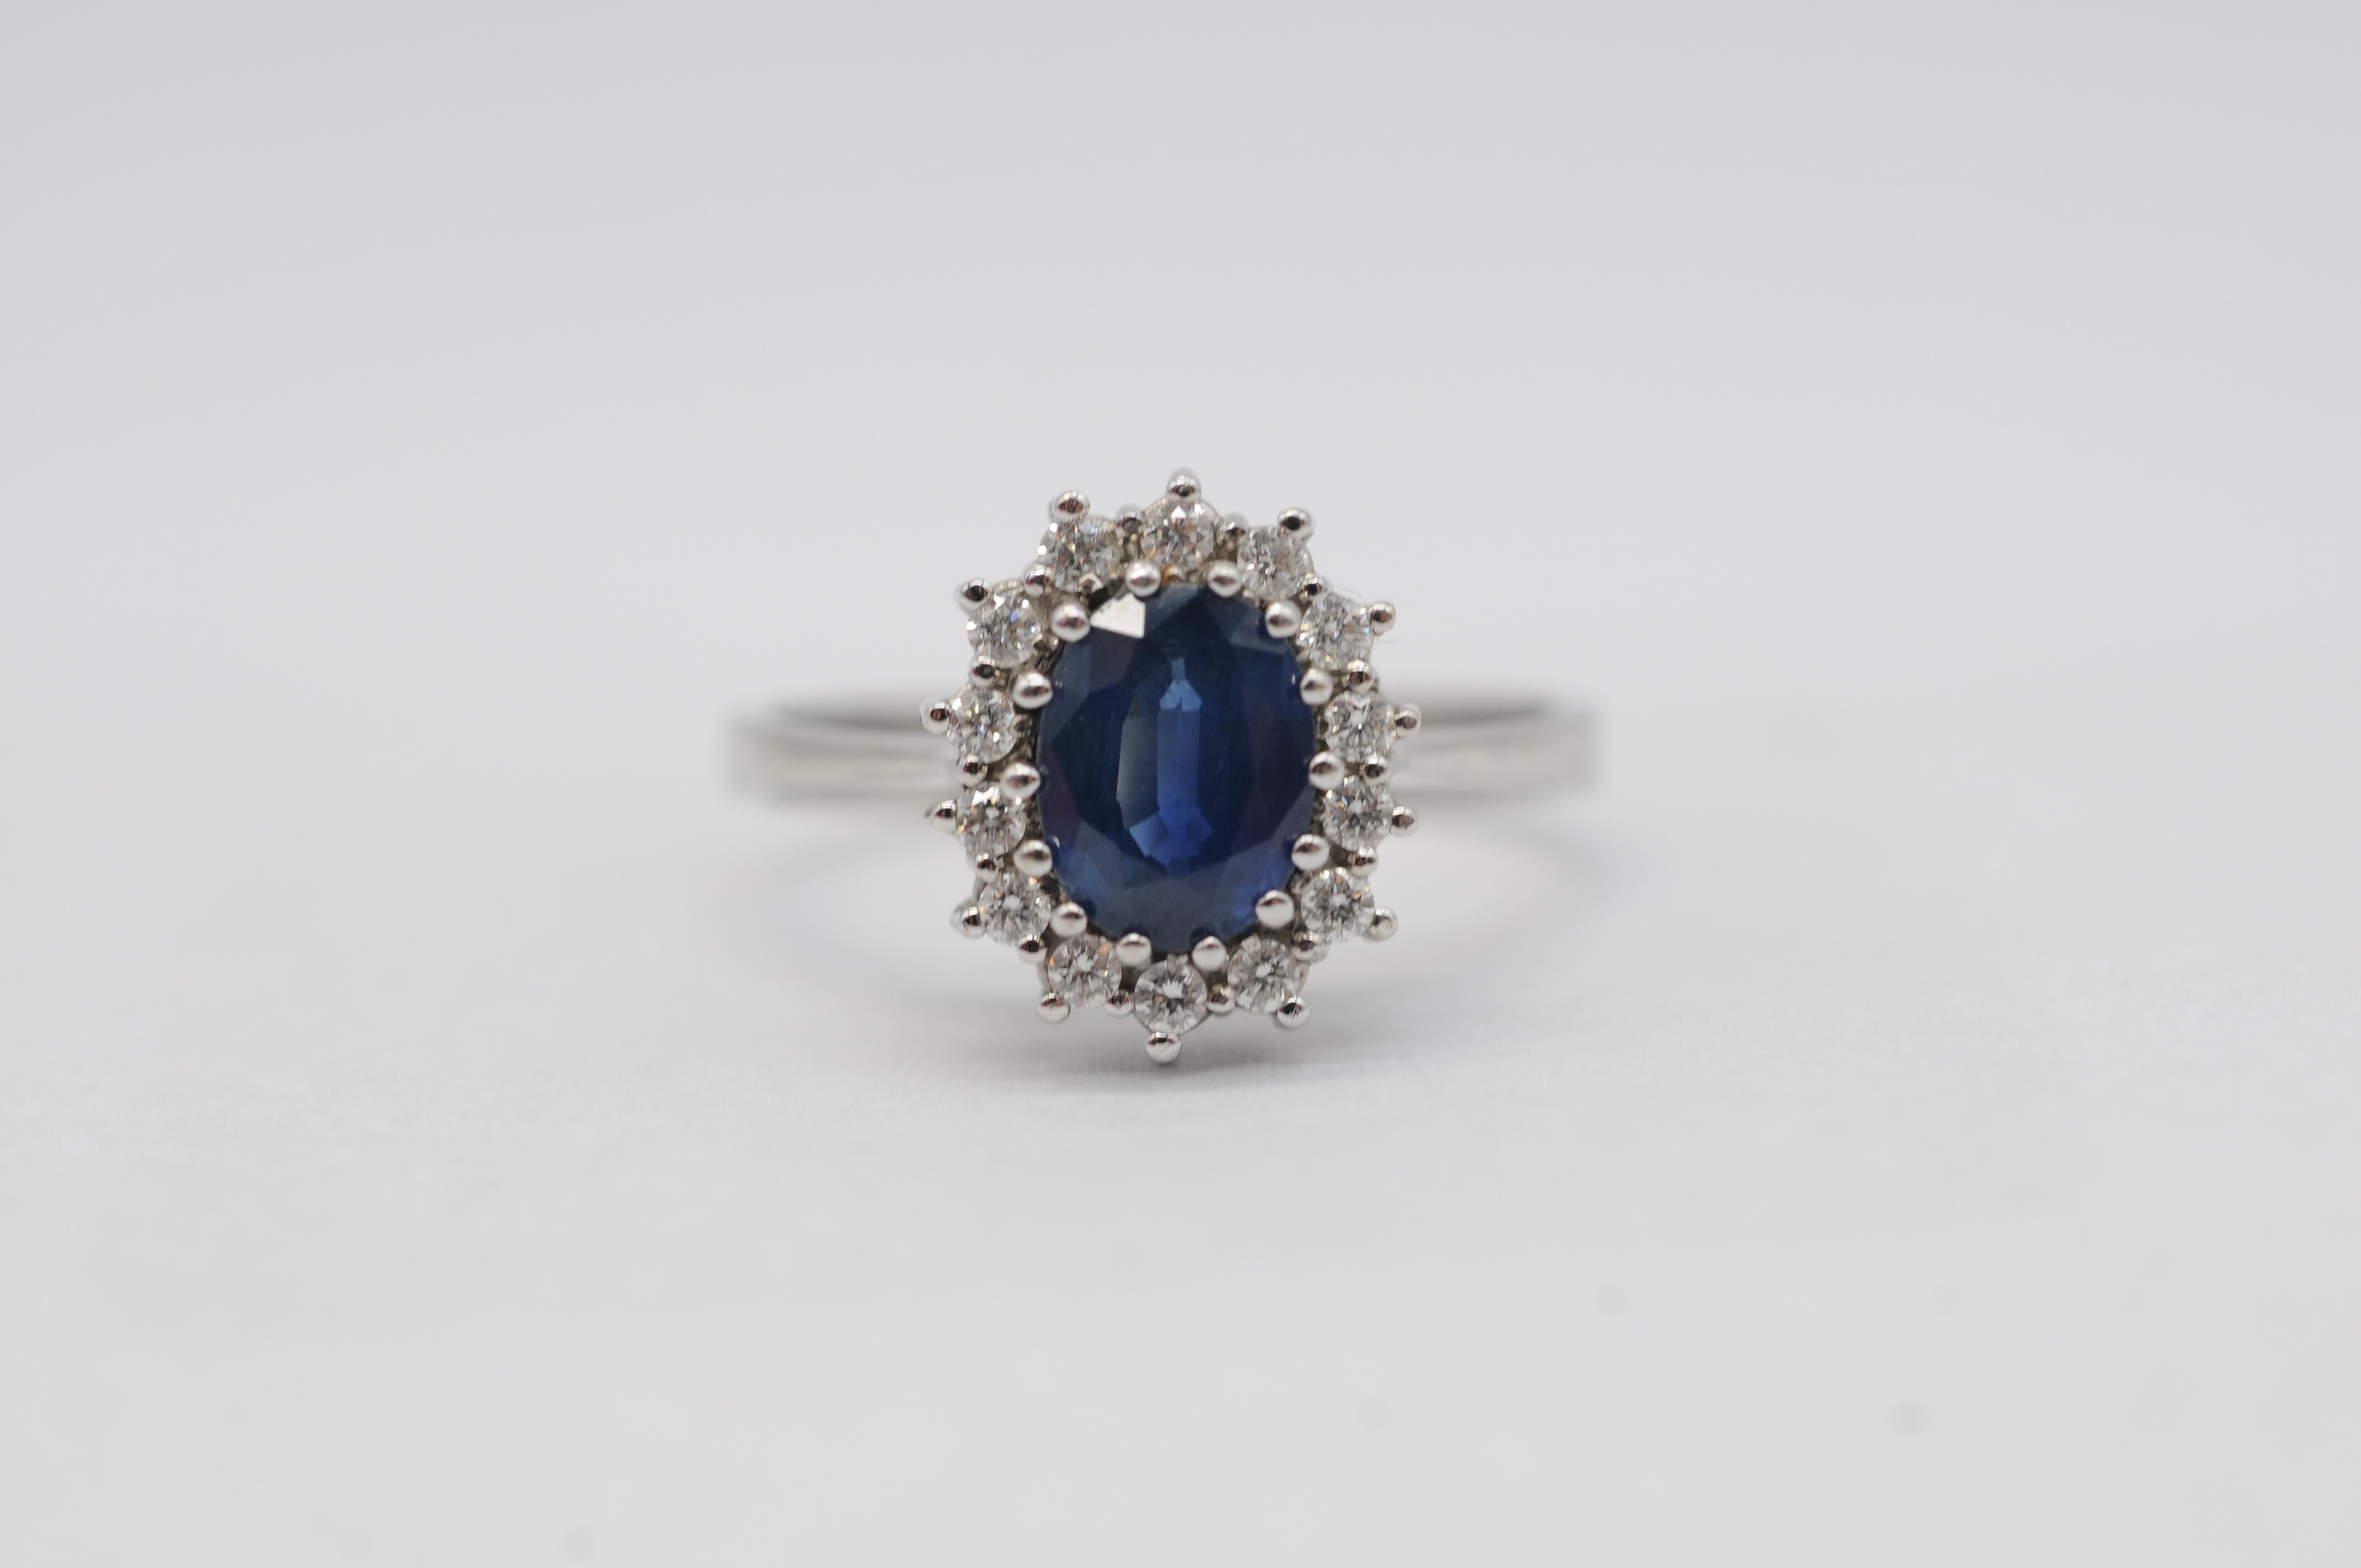 Oval Cut Exquisite gold ring with sapphire and diamonds, like Lady Diana's engagement For Sale